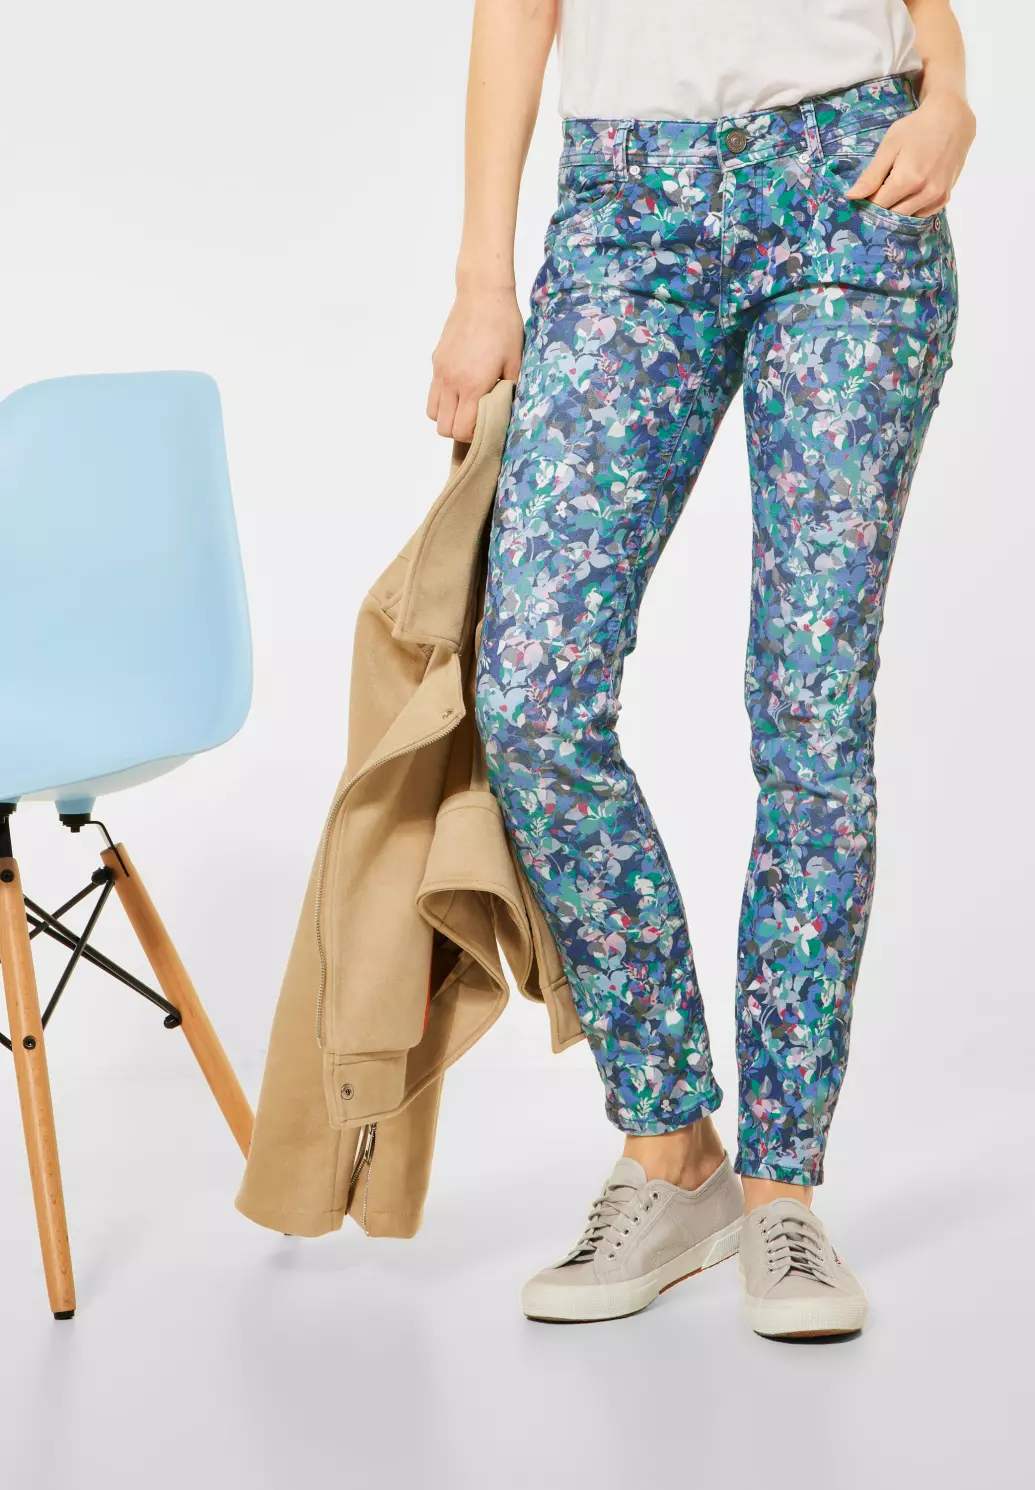 Lady Wide Leg Jeans Floral Denim Pants Trousers Straight High Waist Casual  | eBay